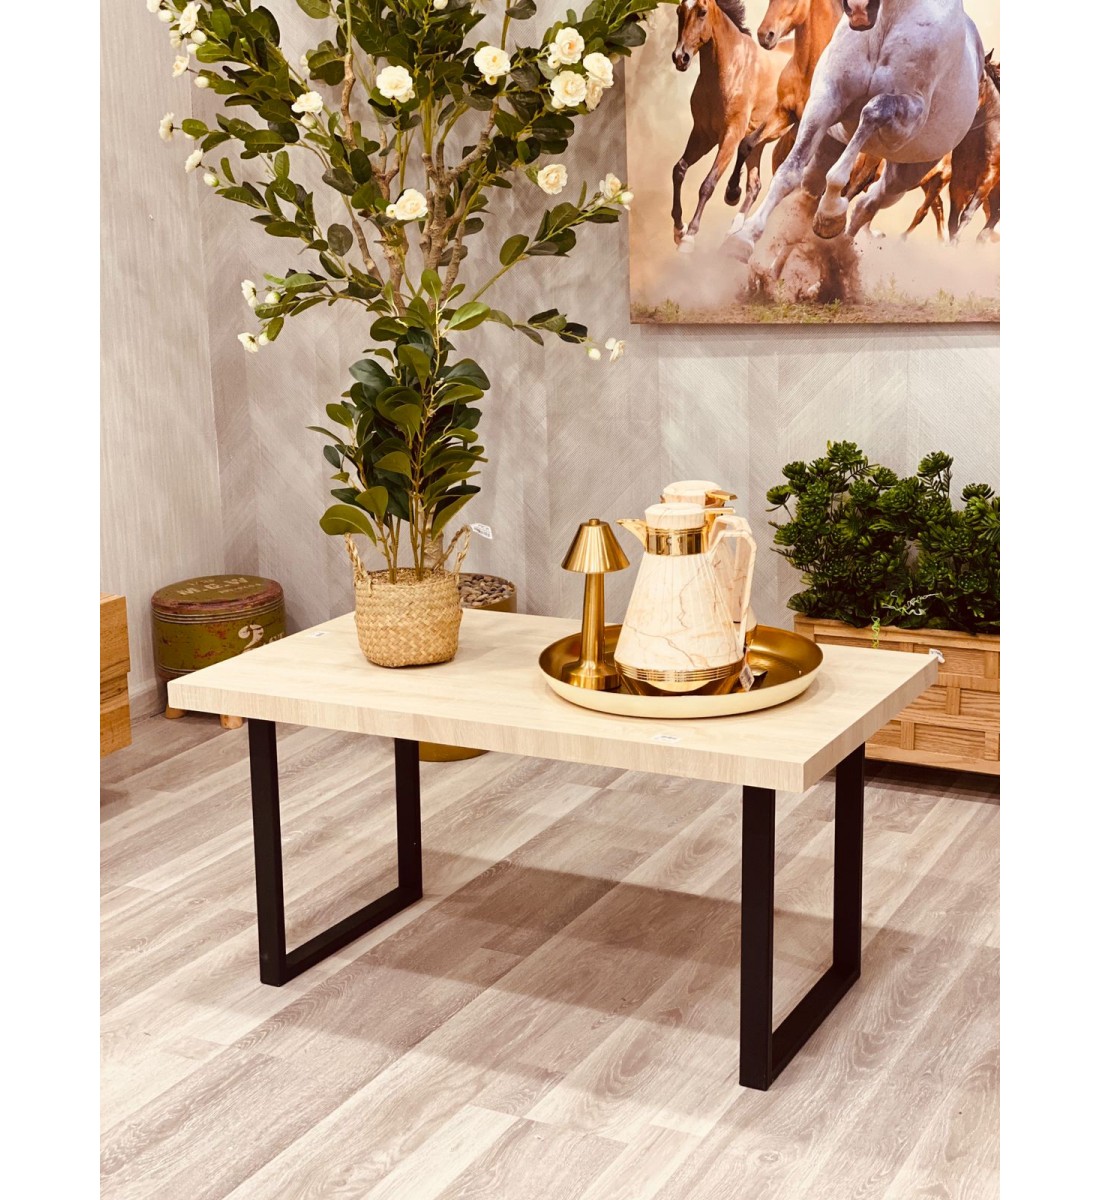 Single wood serving table size 100.58.51cm